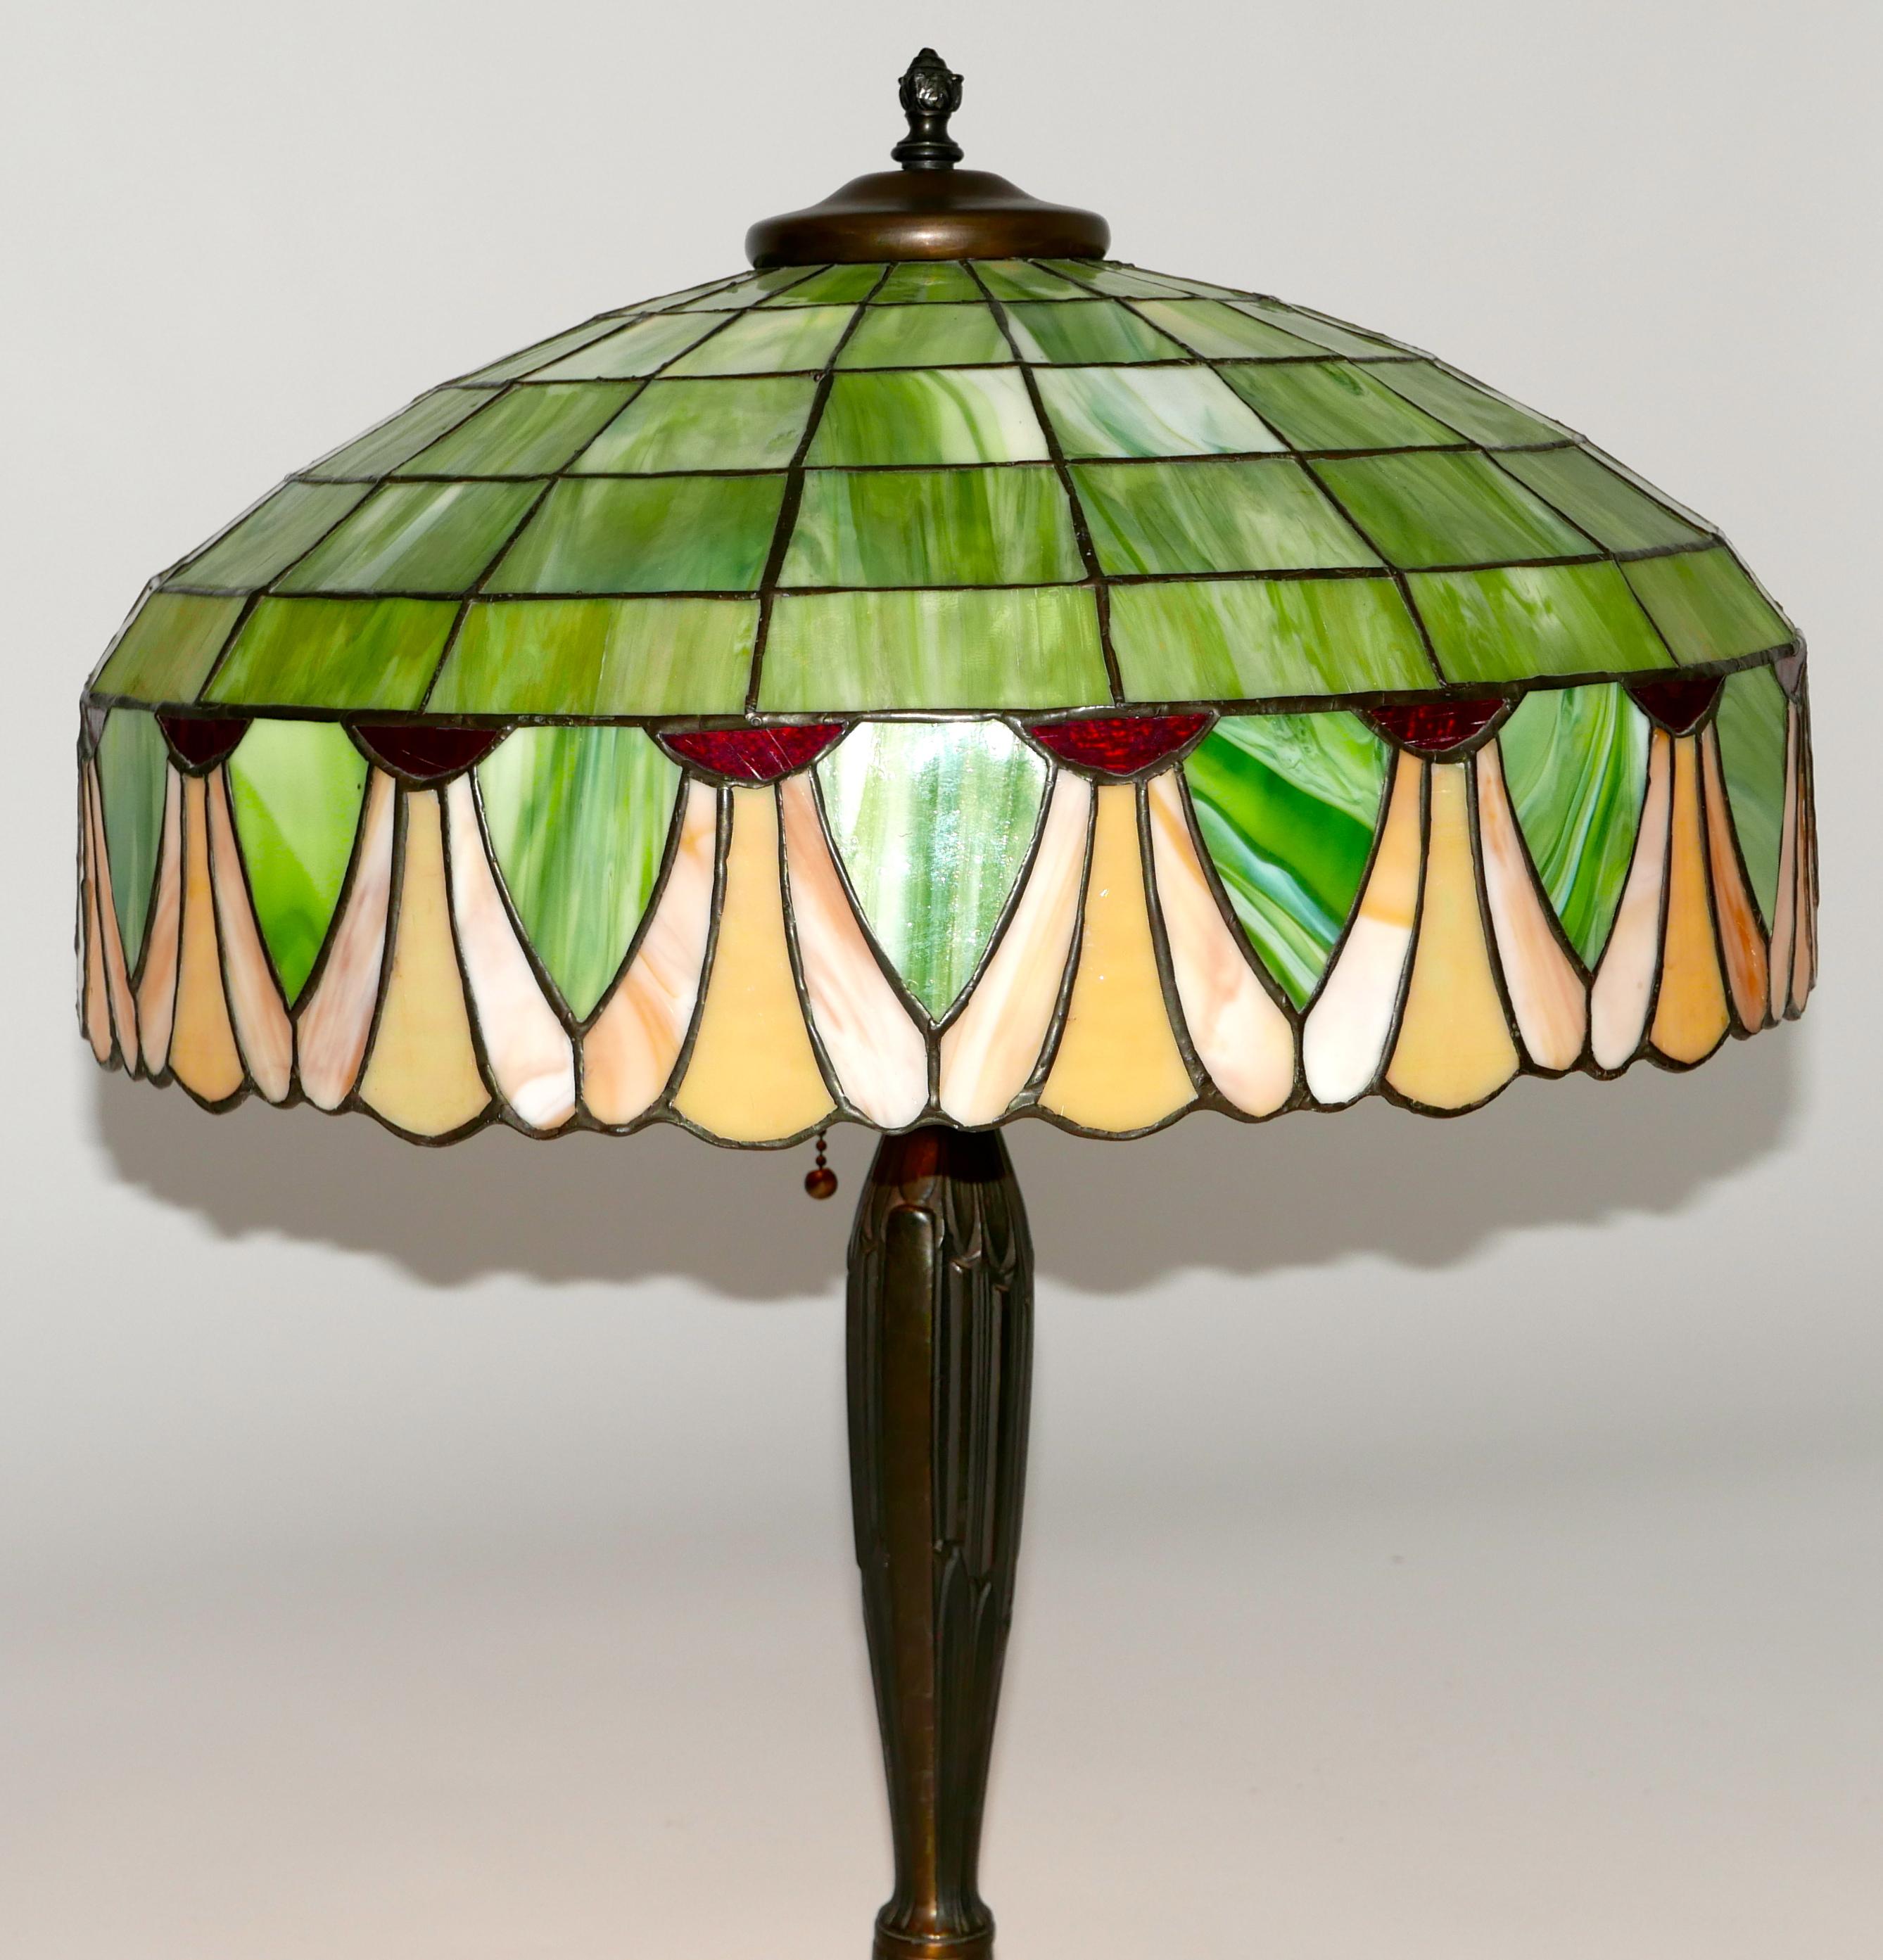 American Art Nouveau Leaded Glass Table Lamp by Lamb Bros. & Greene, Early 20th Century